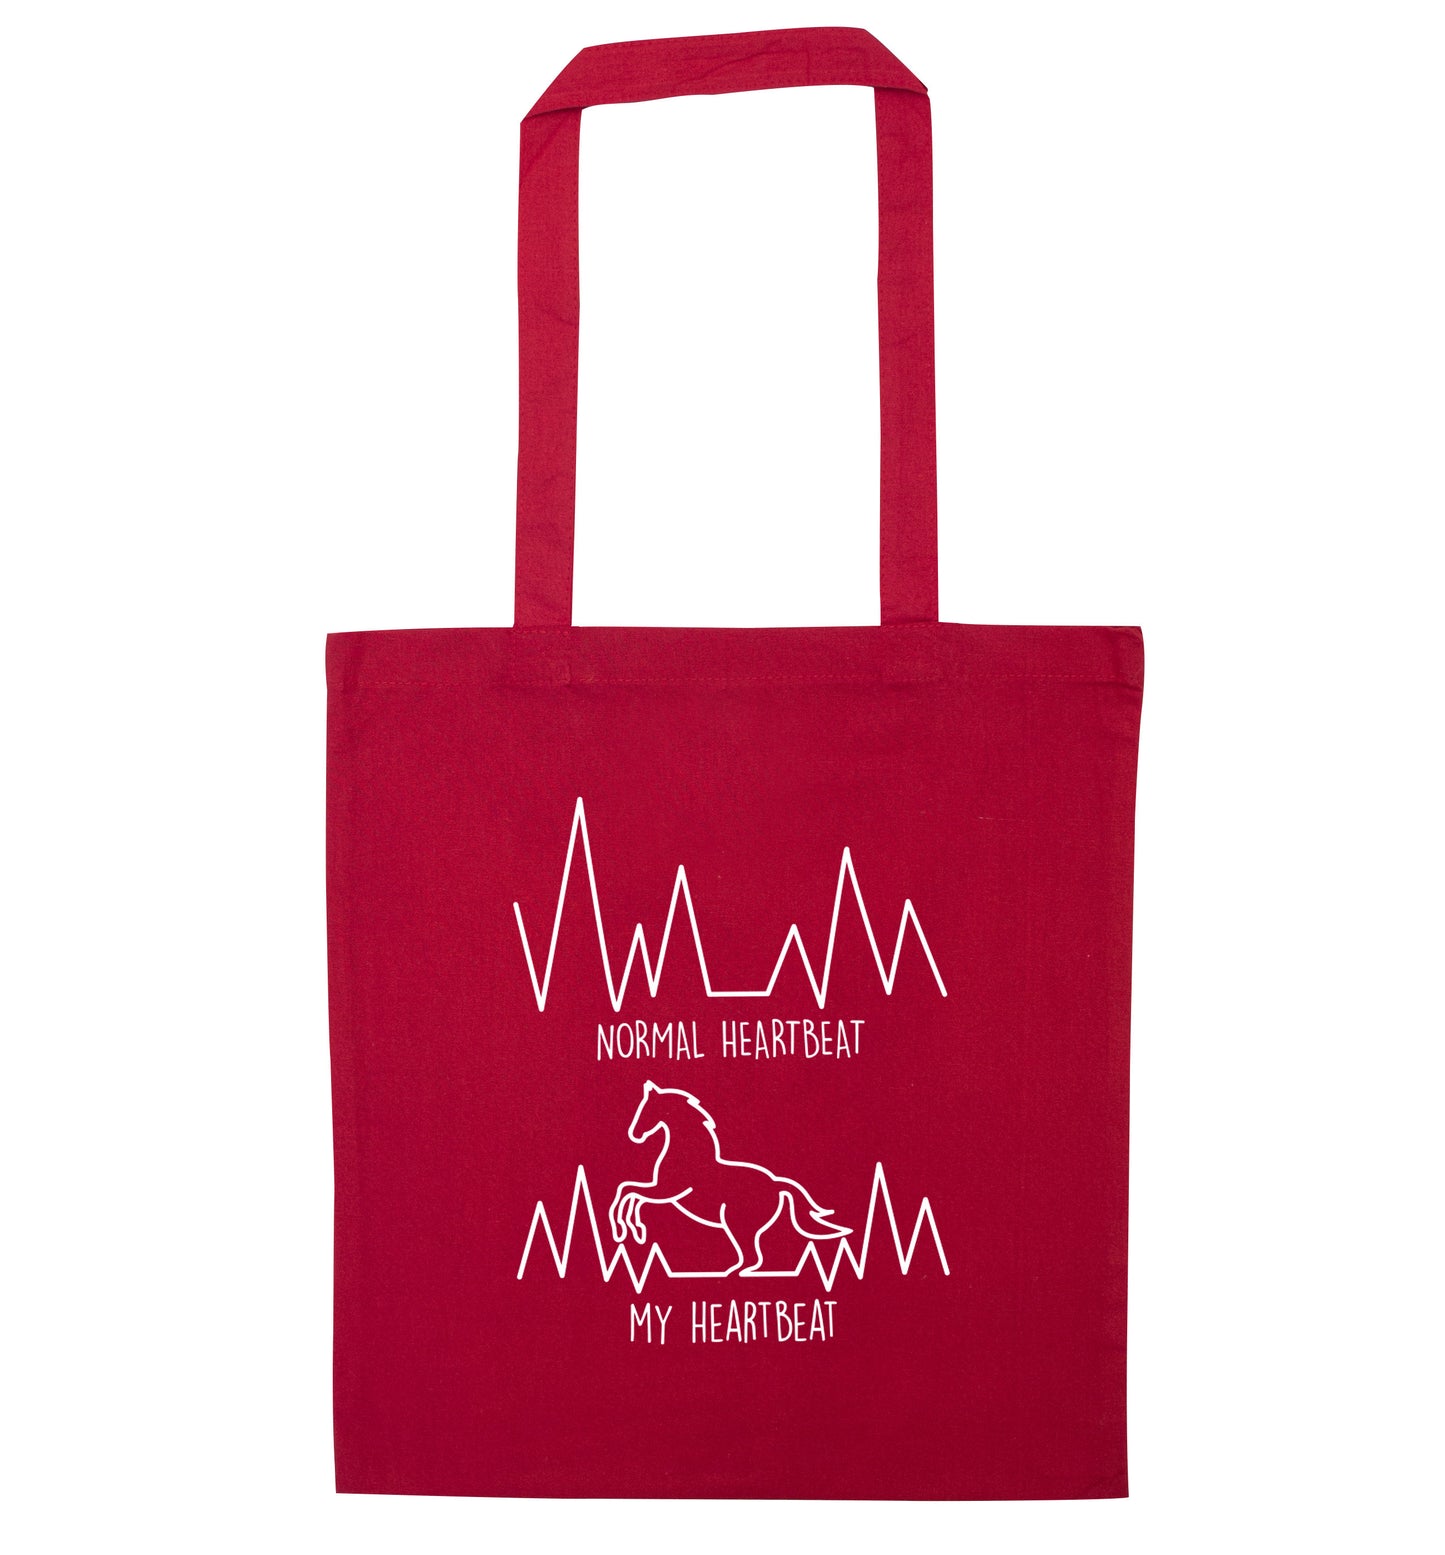 Normal heartbeat, my heartbeat horse lover red tote bag